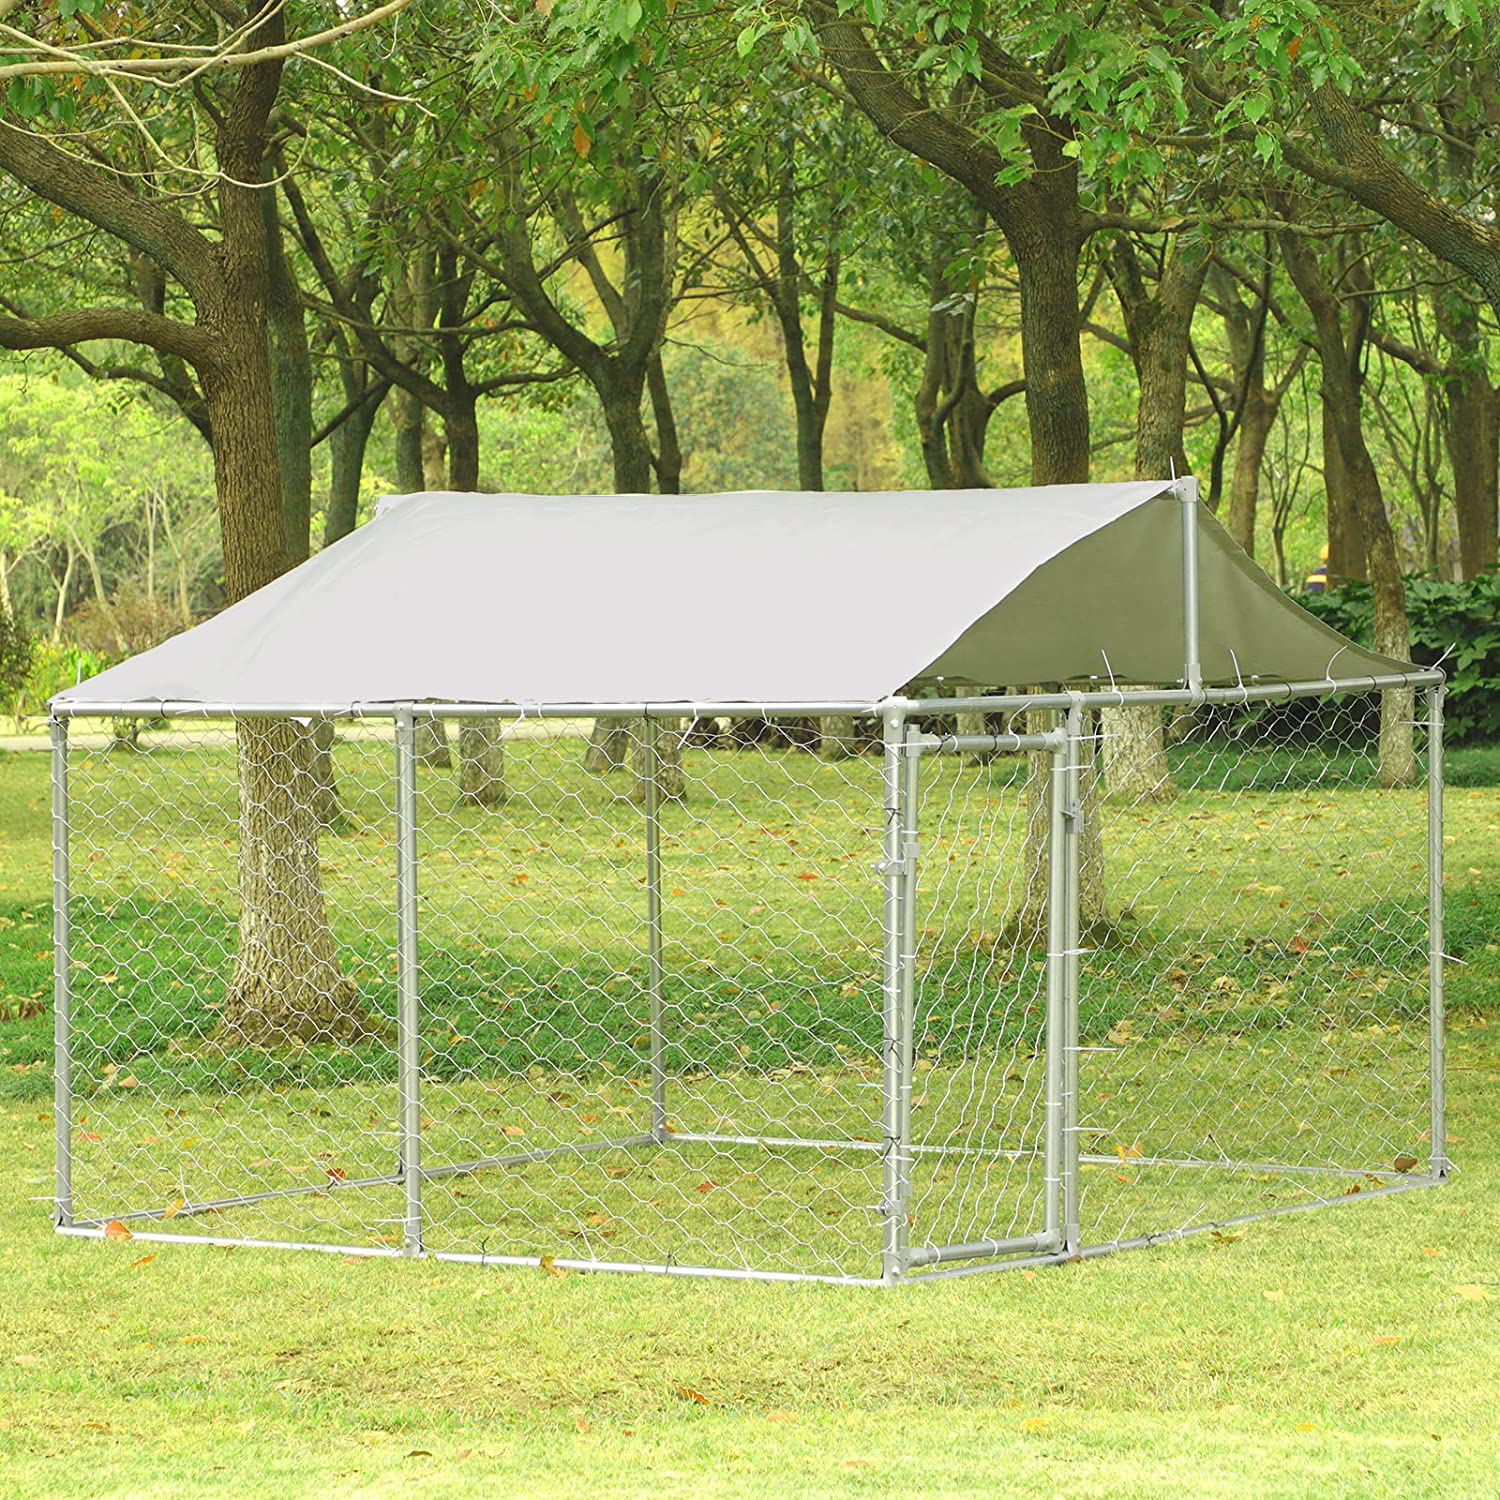 LEISU Outdoor Heavy Duty Dog Houses Dog Kennel with Water Resistant Cover Dog Cage Pet Resort Steel Fence with Mesh Sidewalls Secure Lock